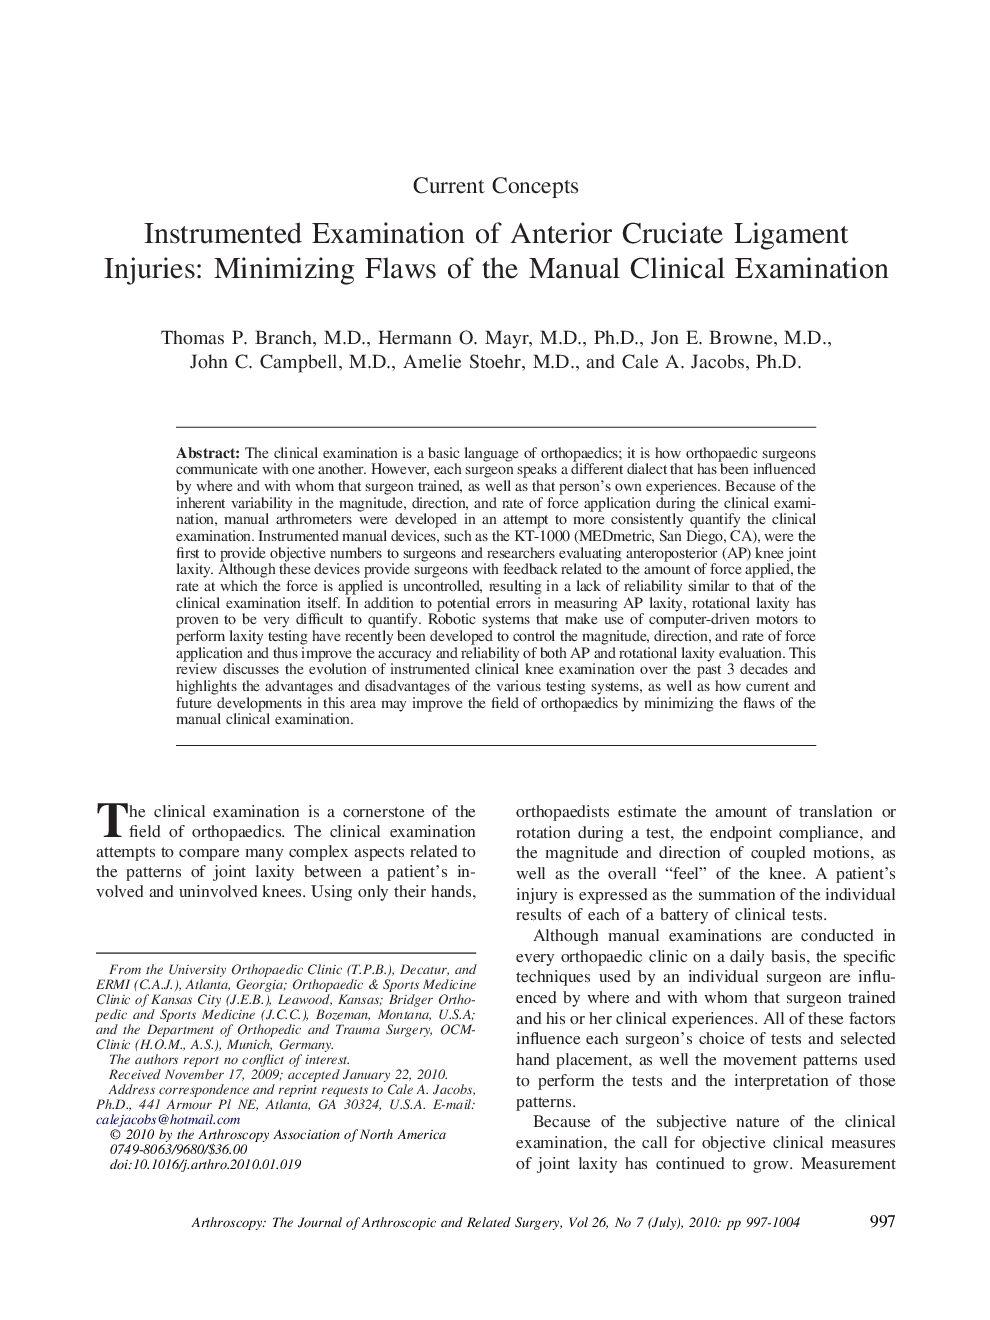 Instrumented Examination of Anterior Cruciate Ligament Injuries: Minimizing Flaws of the Manual Clinical Examination 